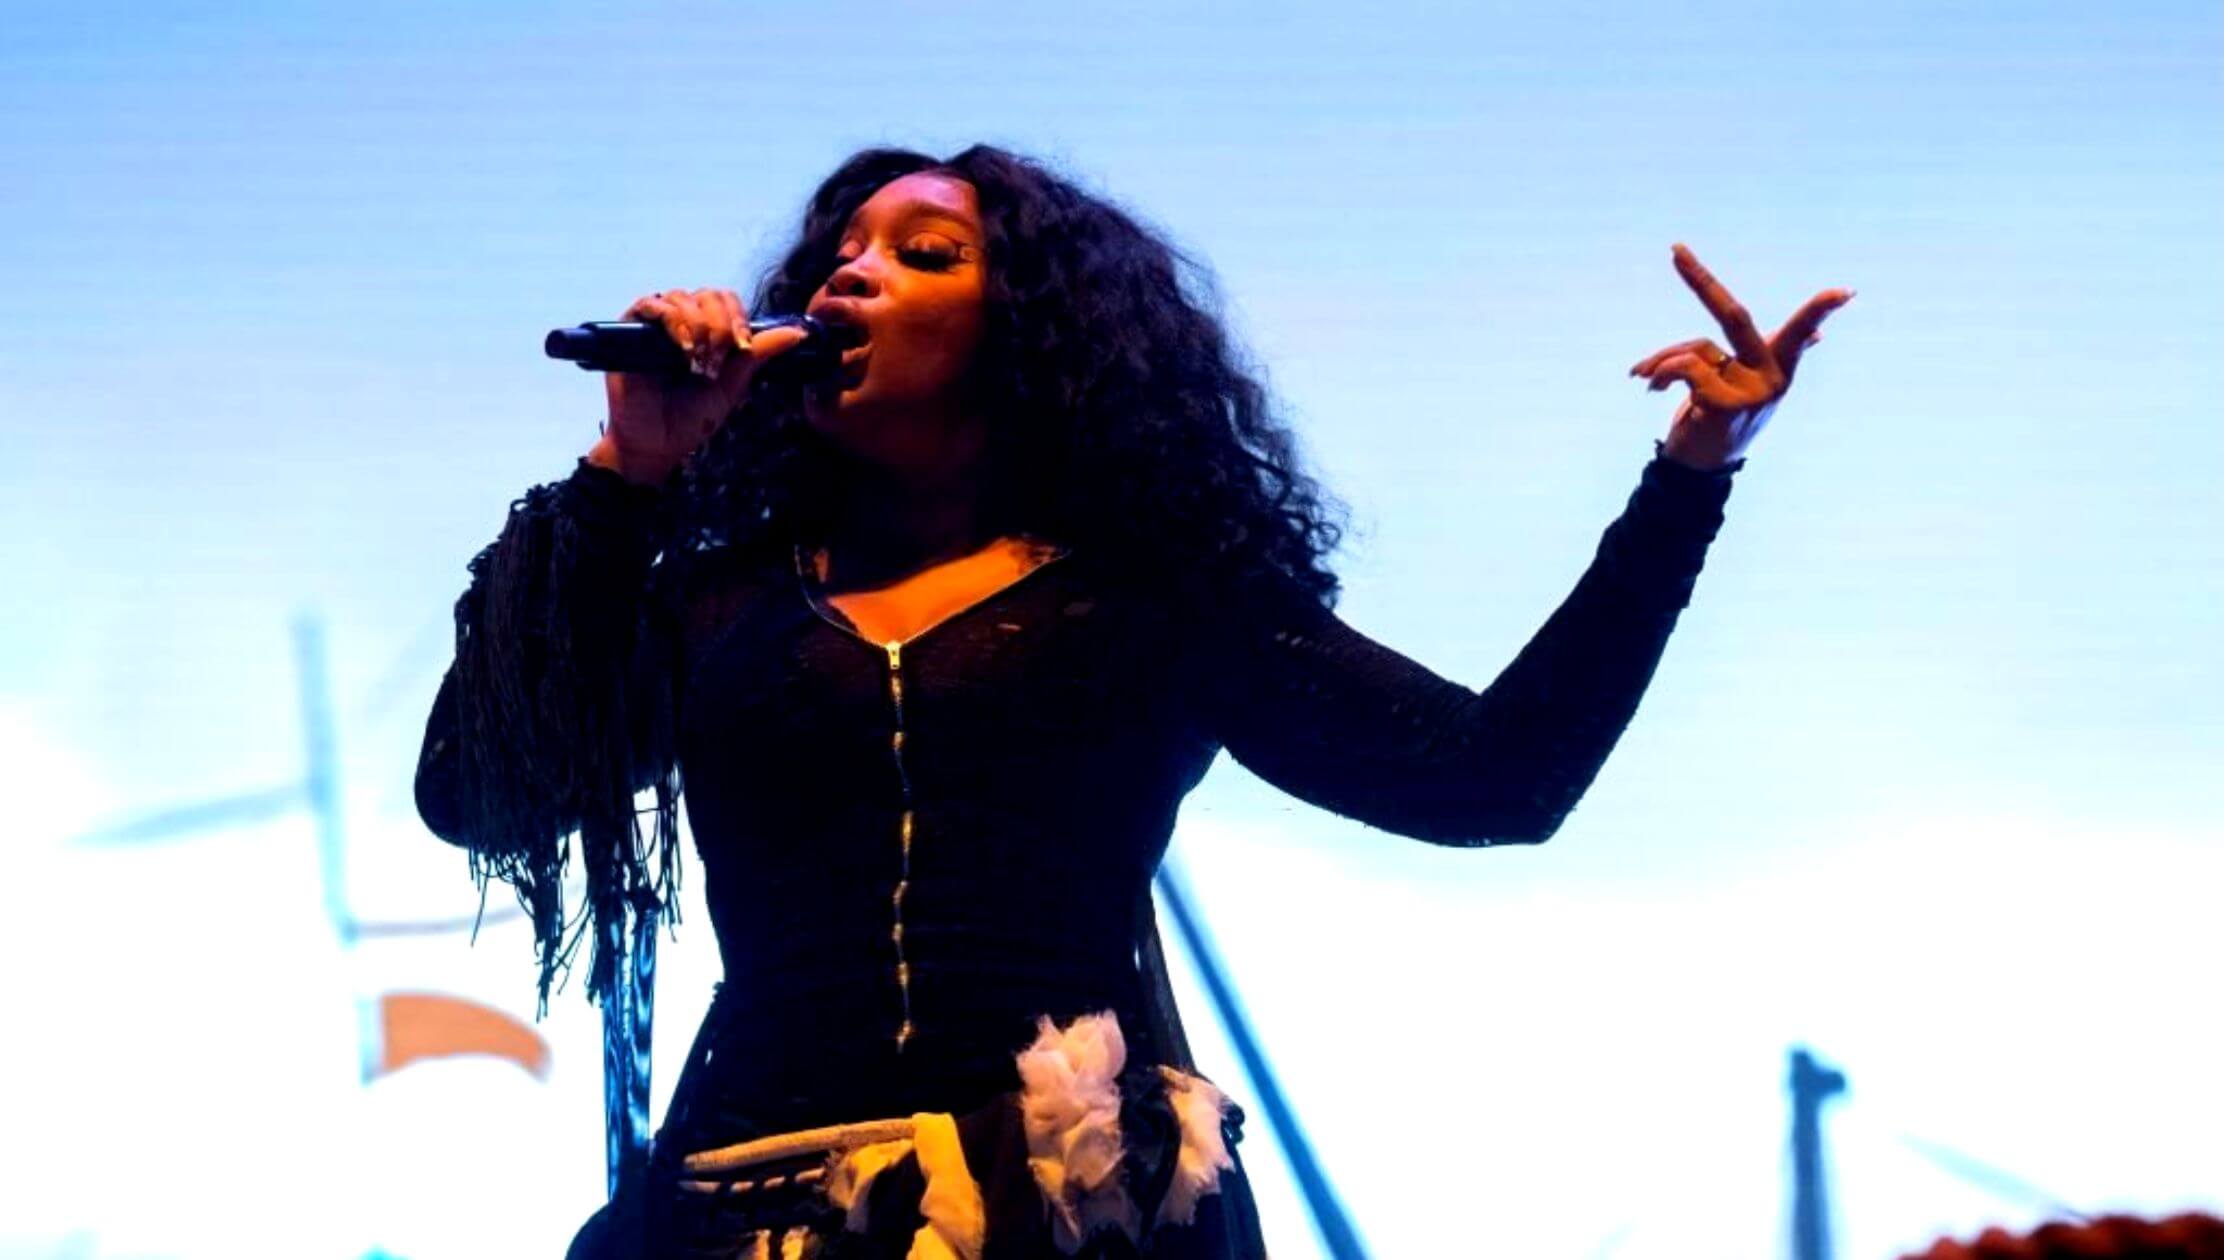 The New Album SOS By SZA Is All Set To Release